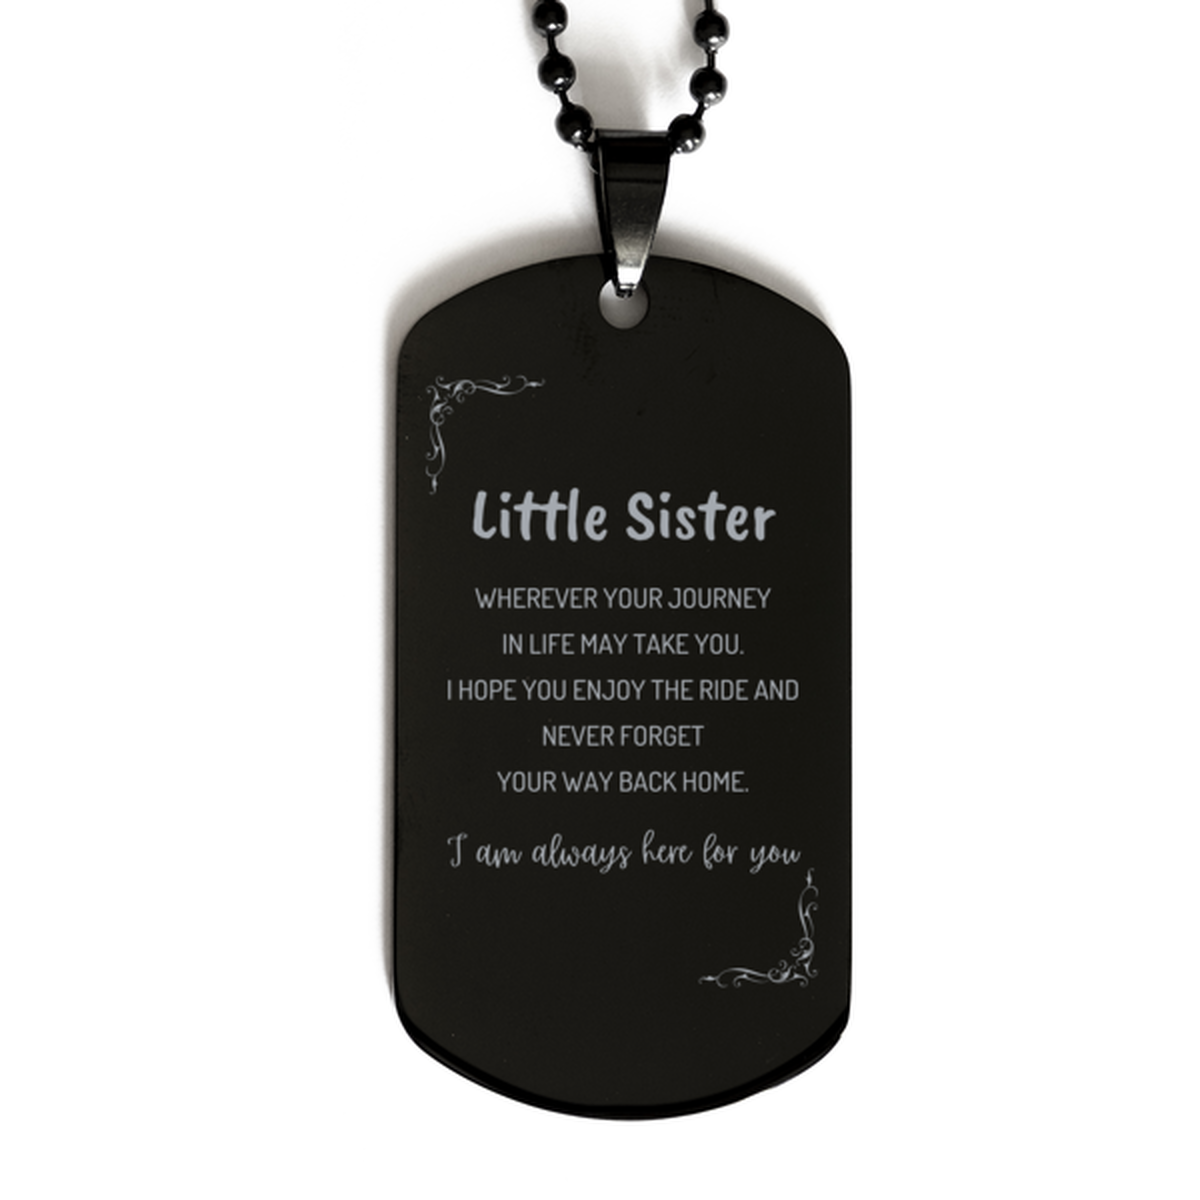 Little Sister wherever your journey in life may take you, I am always here for you Little Sister Black Dog Tag, Awesome Christmas Gifts For Little Sister, Little Sister Birthday Gifts for Men Women Family Loved One